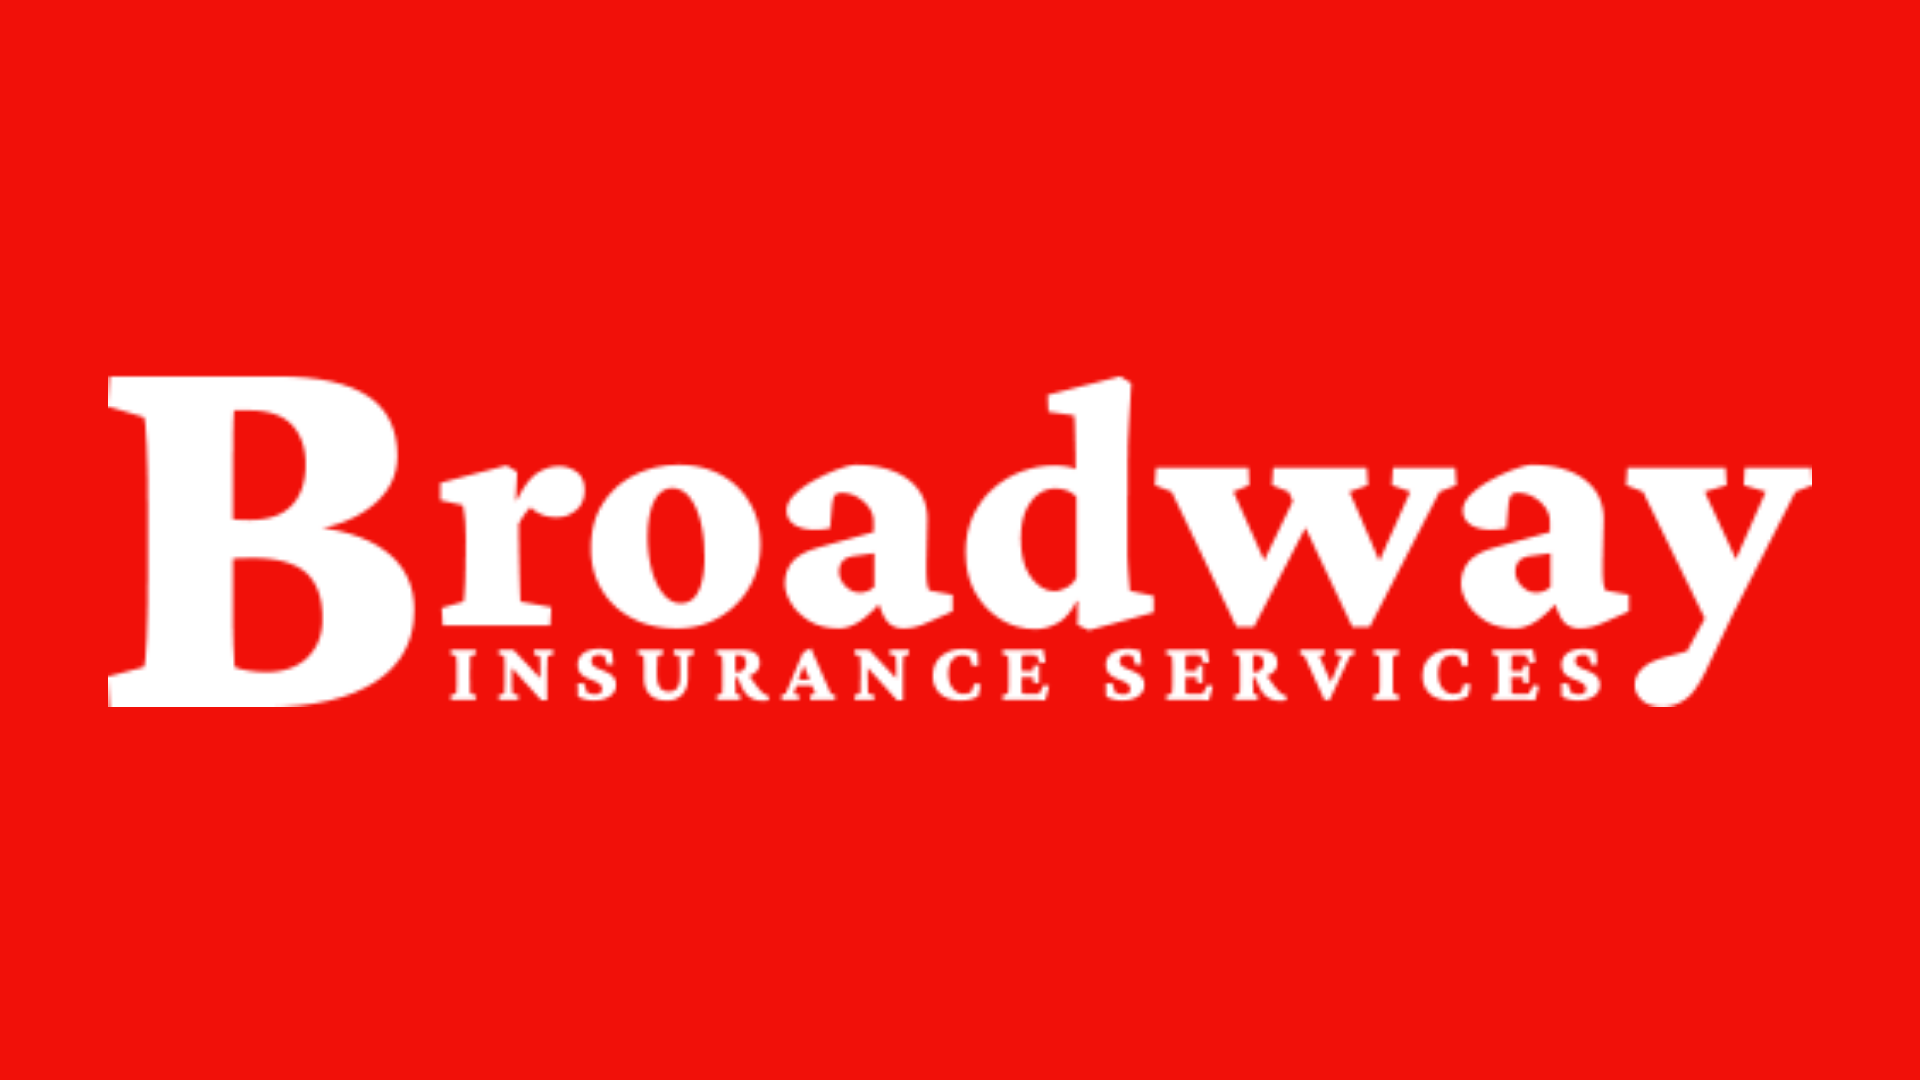 Broadway Insurance Services